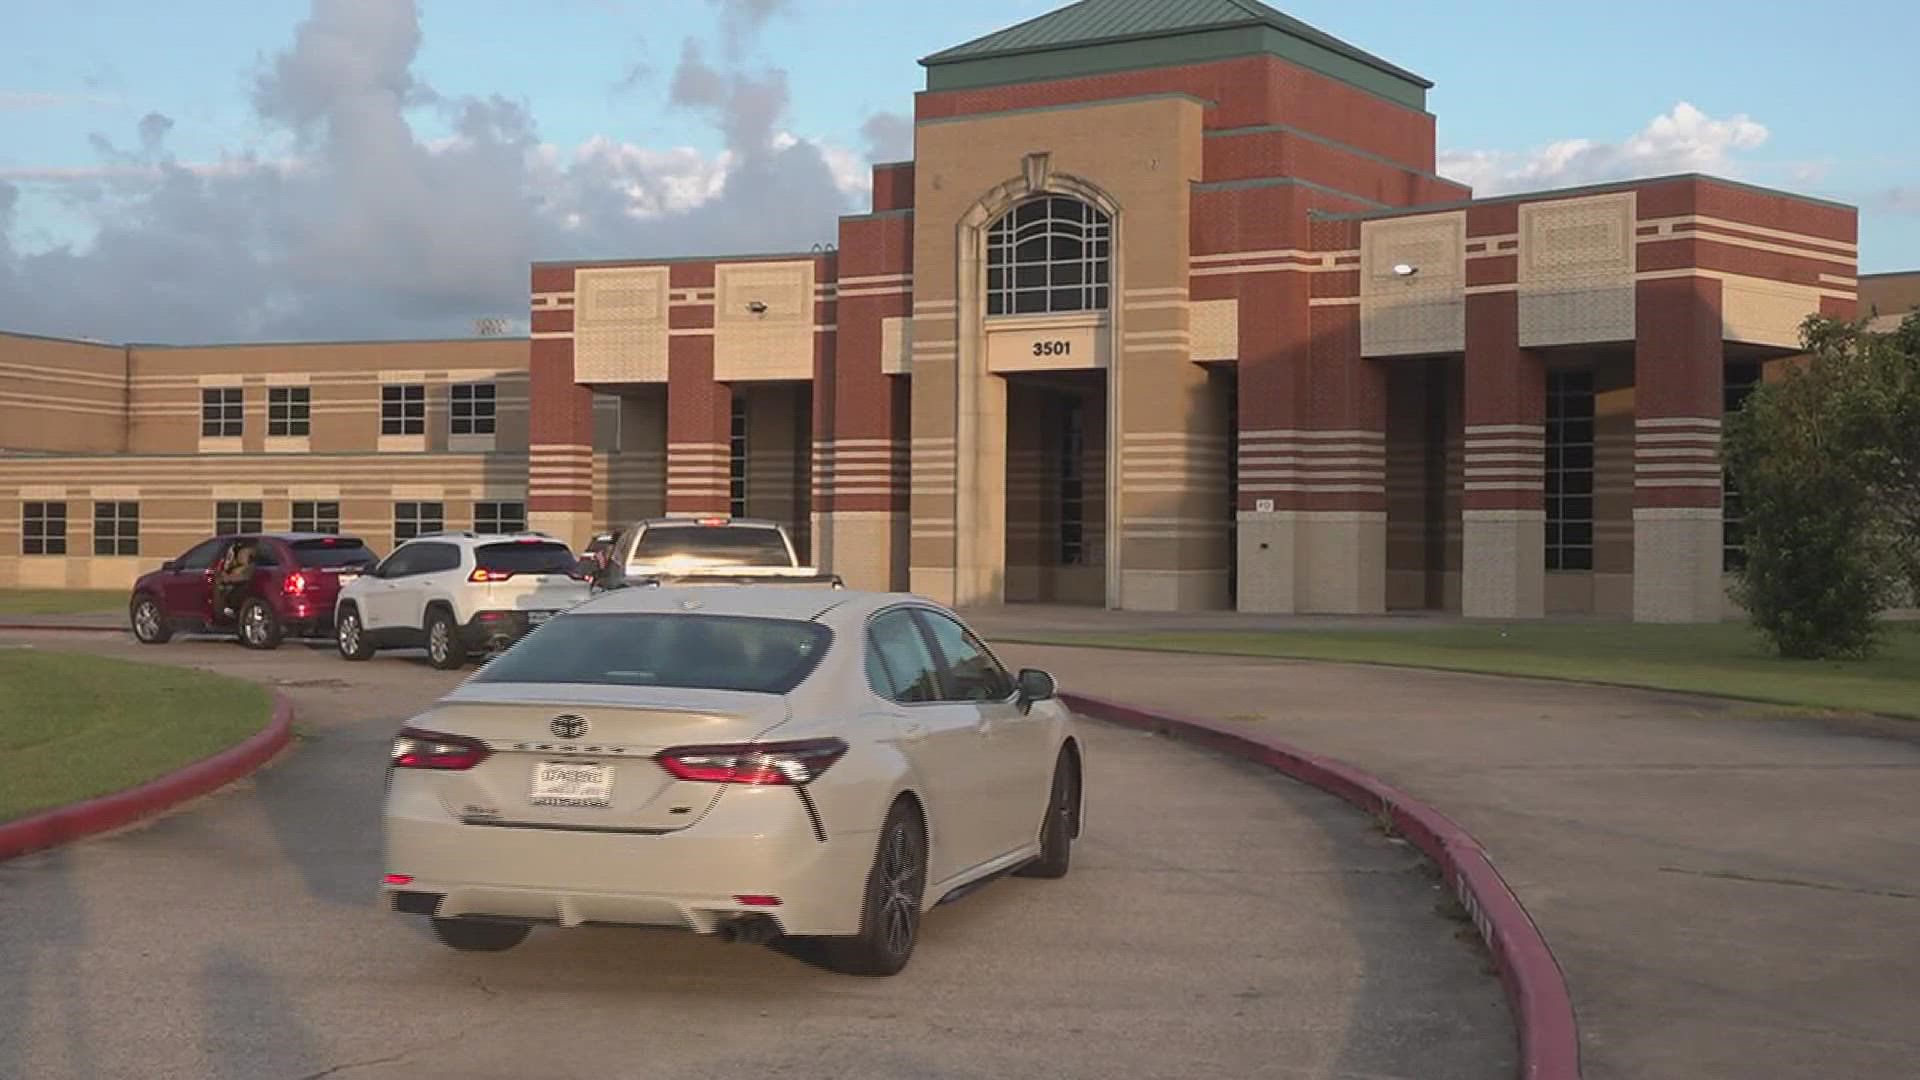 Many Southeast Texas students began their first day of school on Wednesday morning.